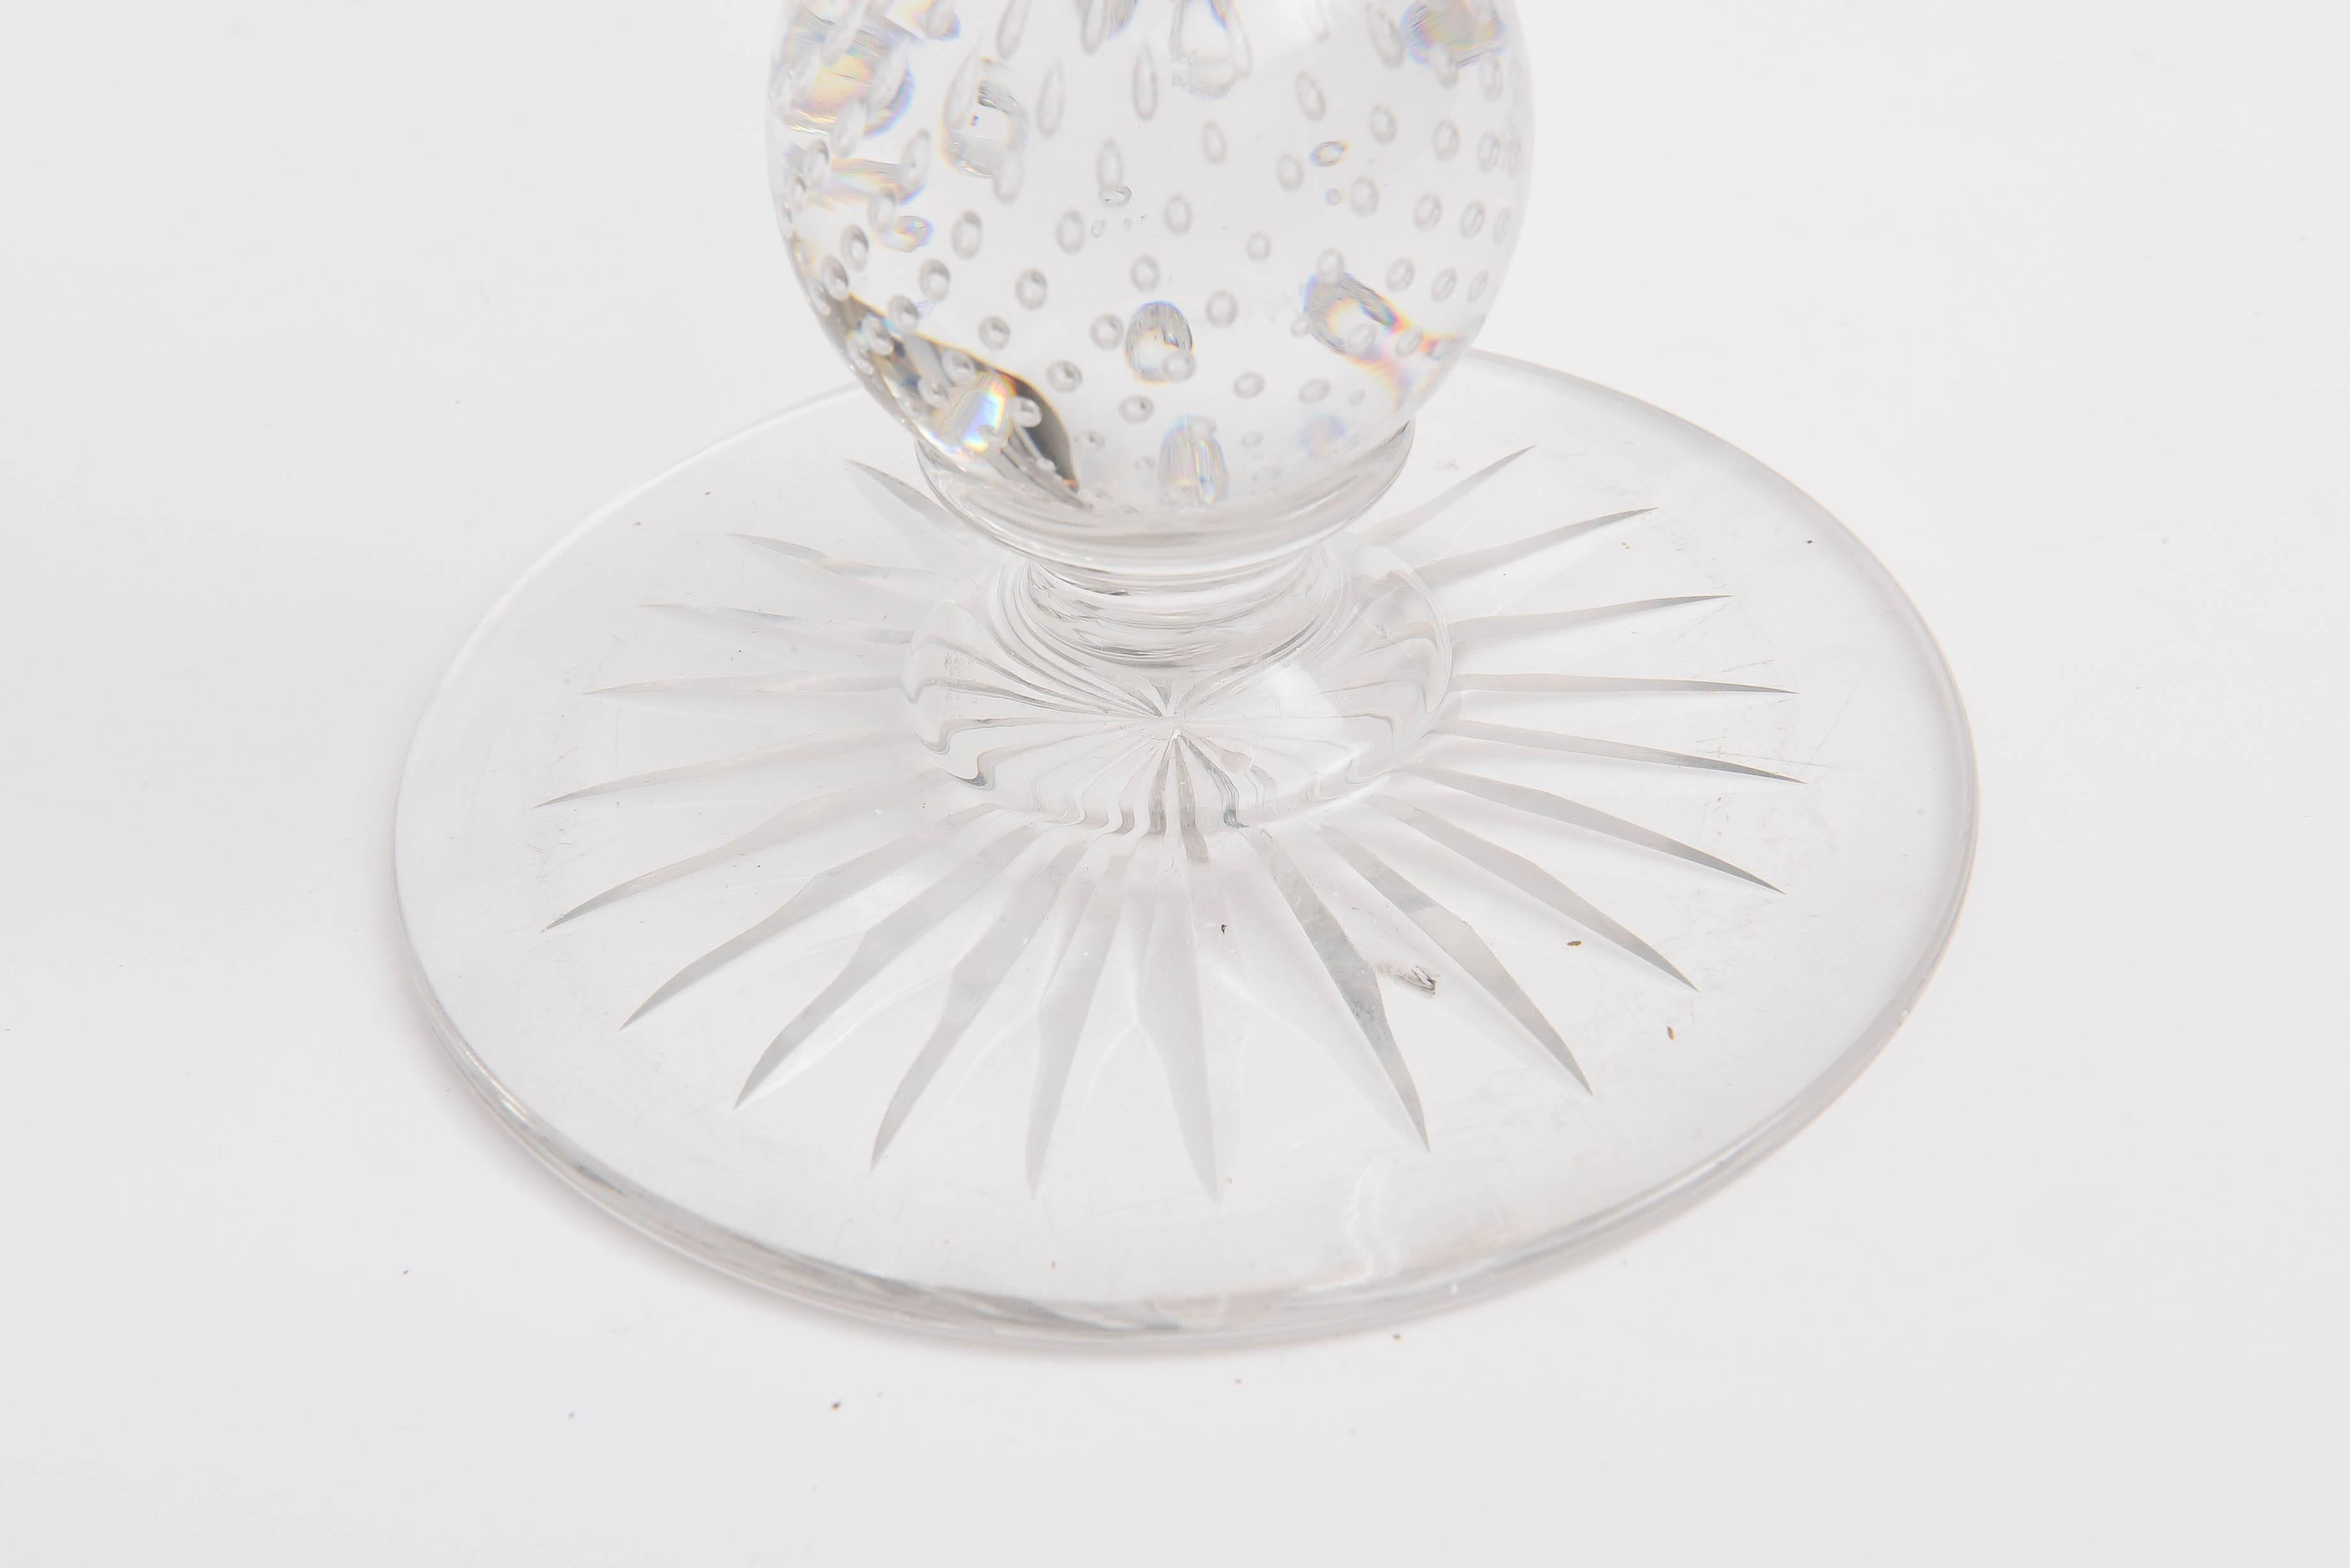 Hand-Crafted Tall and Elegant Pairpoint Cut Glass Vase